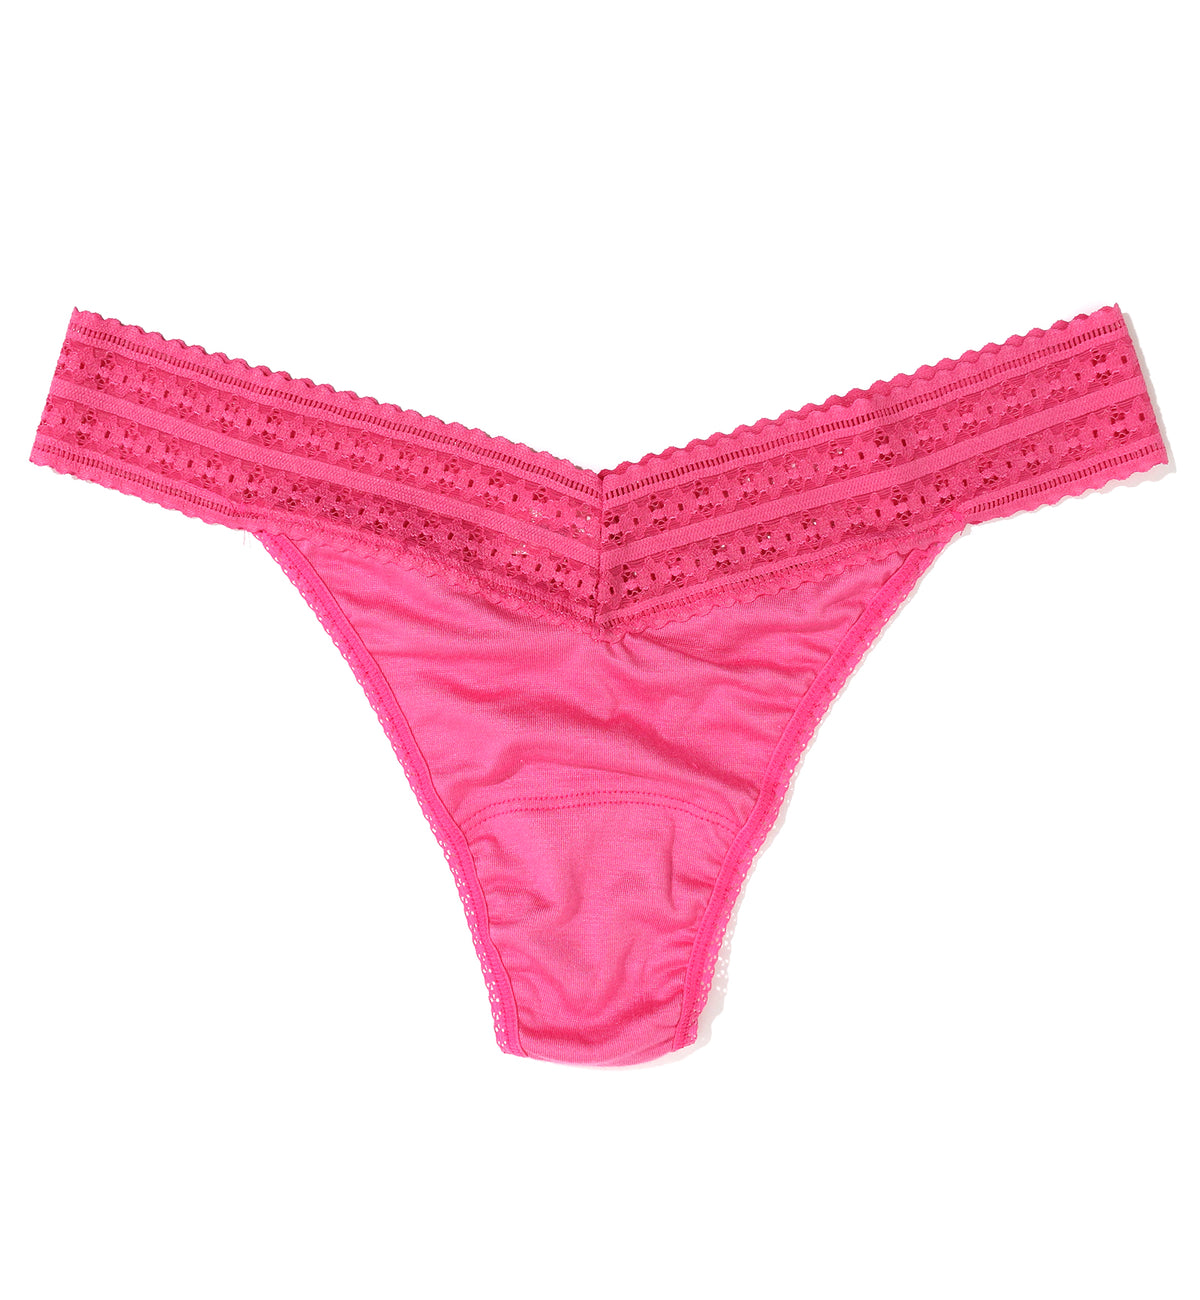 Hanky Panky Dream Original Rise Thong (631104),Kiss from a Rose - Kiss from a Rose,One Size